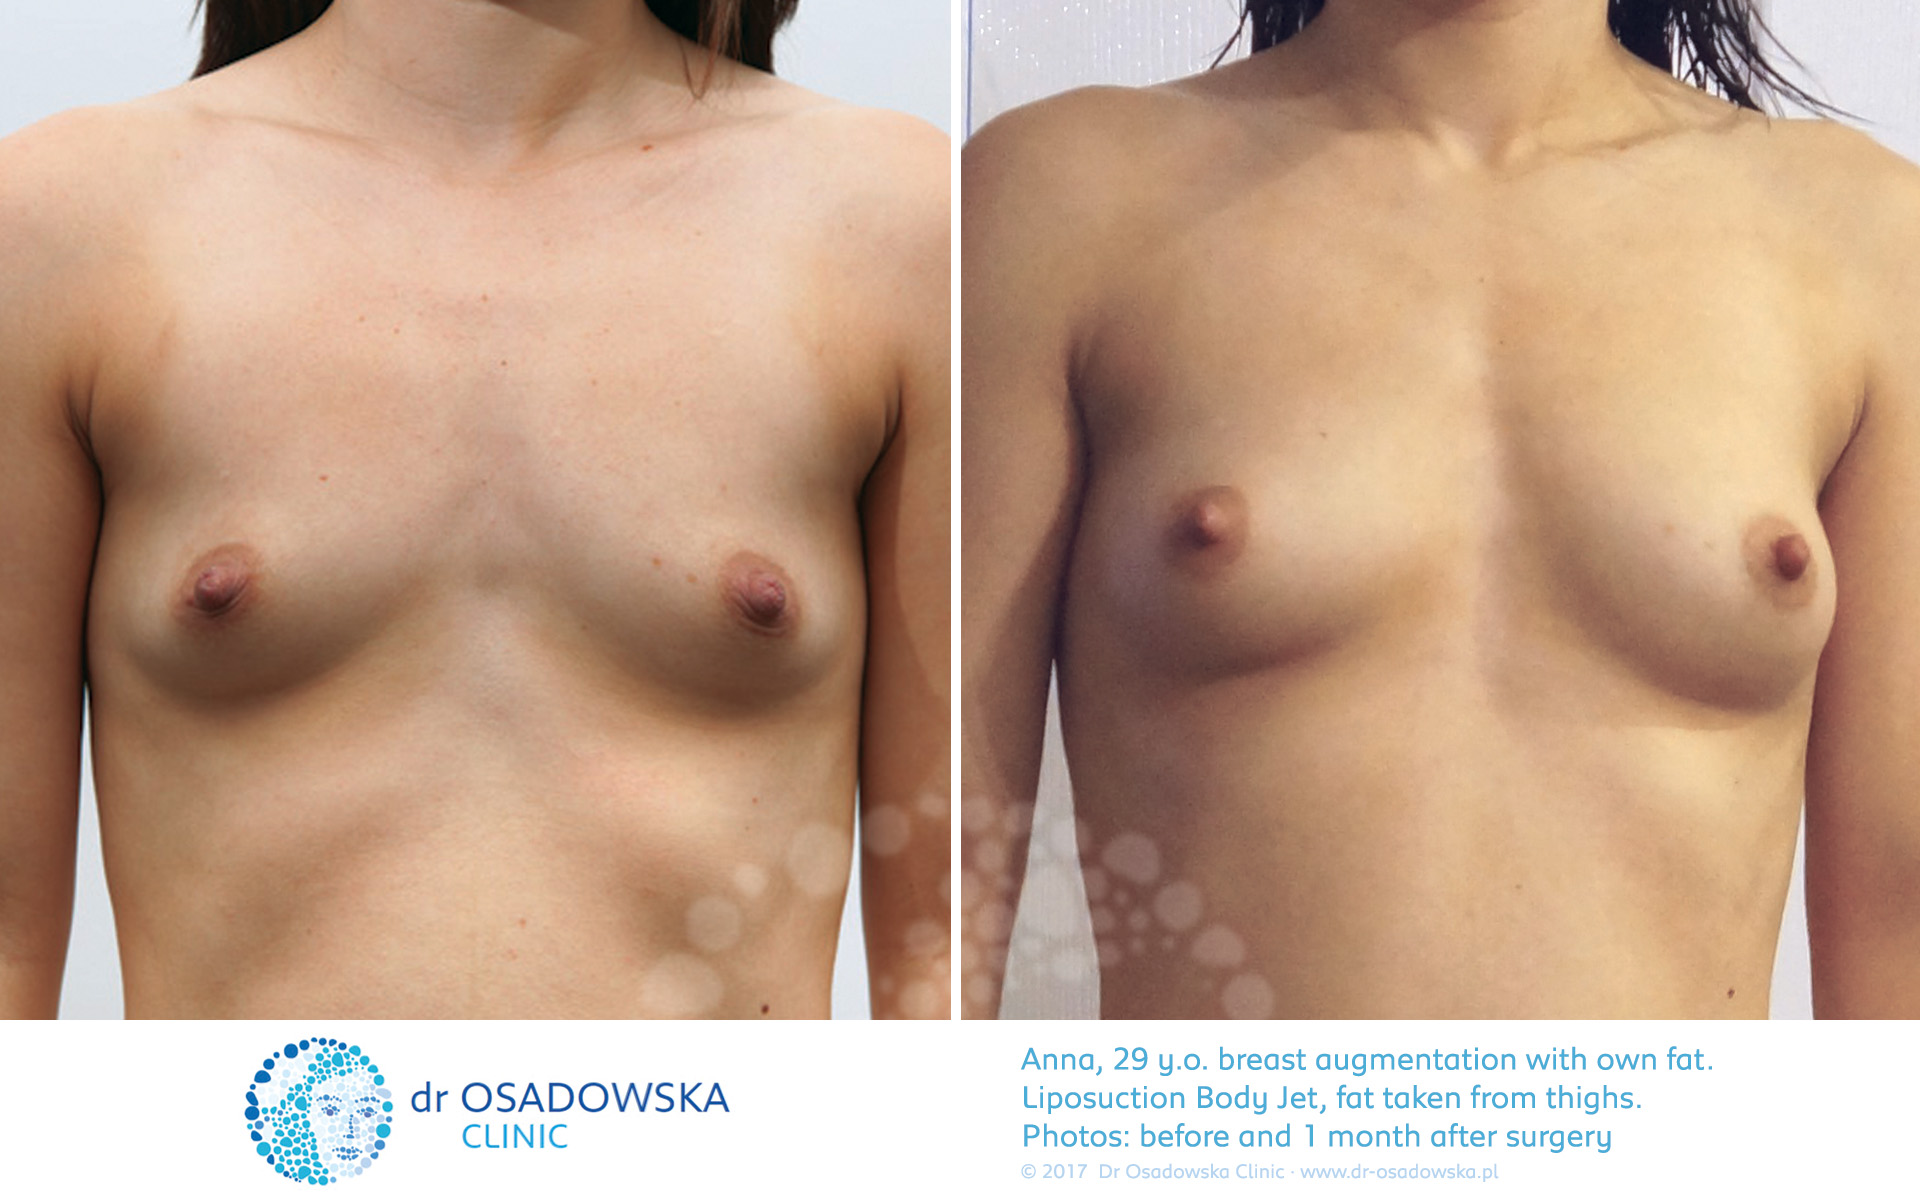 Breast augmentation with own fat - pictures before and one day after surgery. Laser liposuction LipoLife. Anna, a 29 year old from Poland living in the UK.